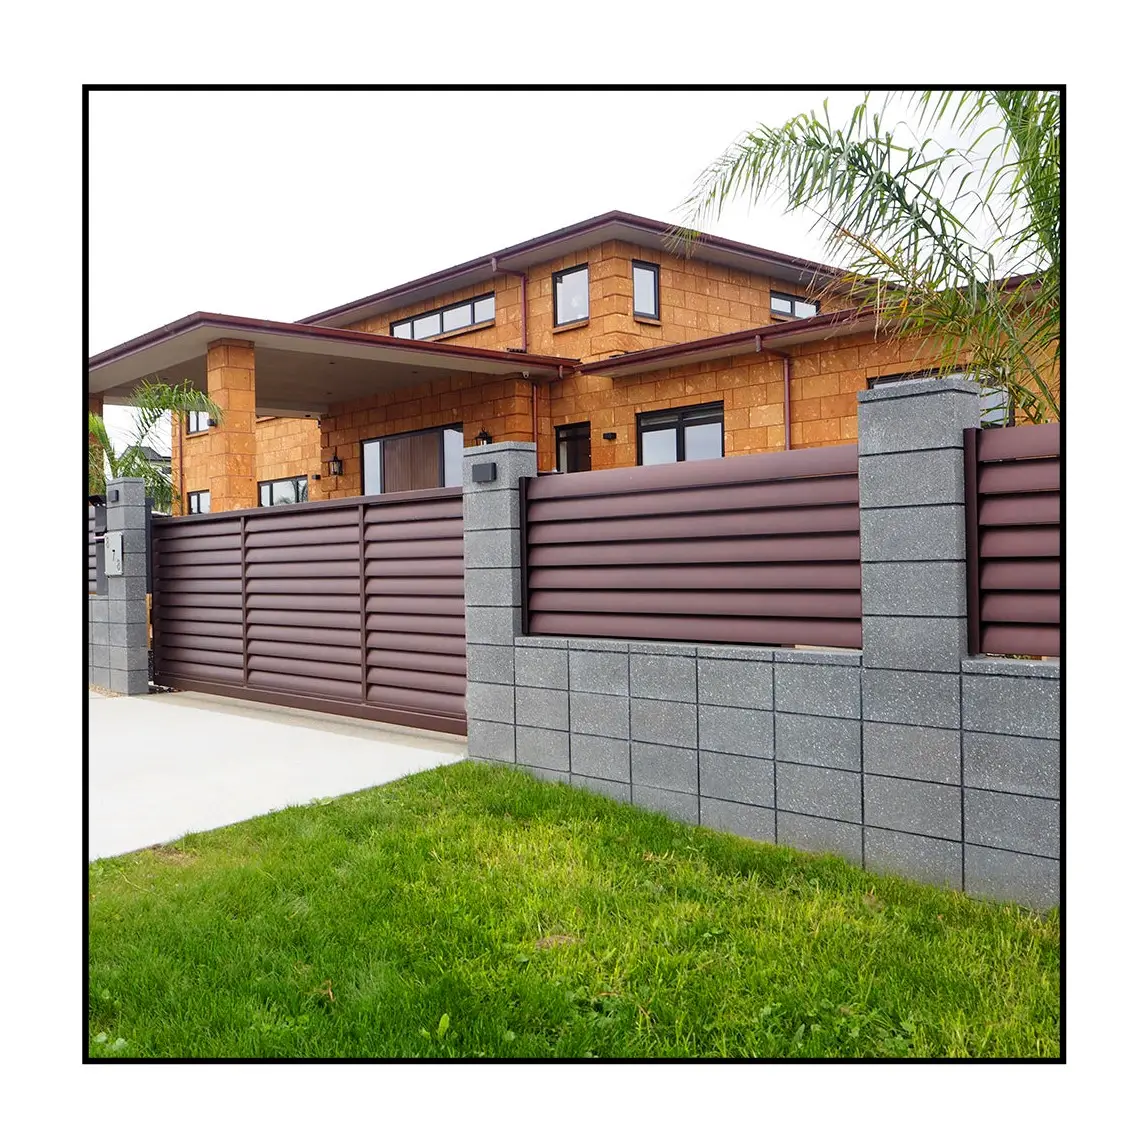 KS METAL Outdoor decorative aluminium louvered fence Horizontal louvre blades metal privacy fence panels Garden fence Outdoor